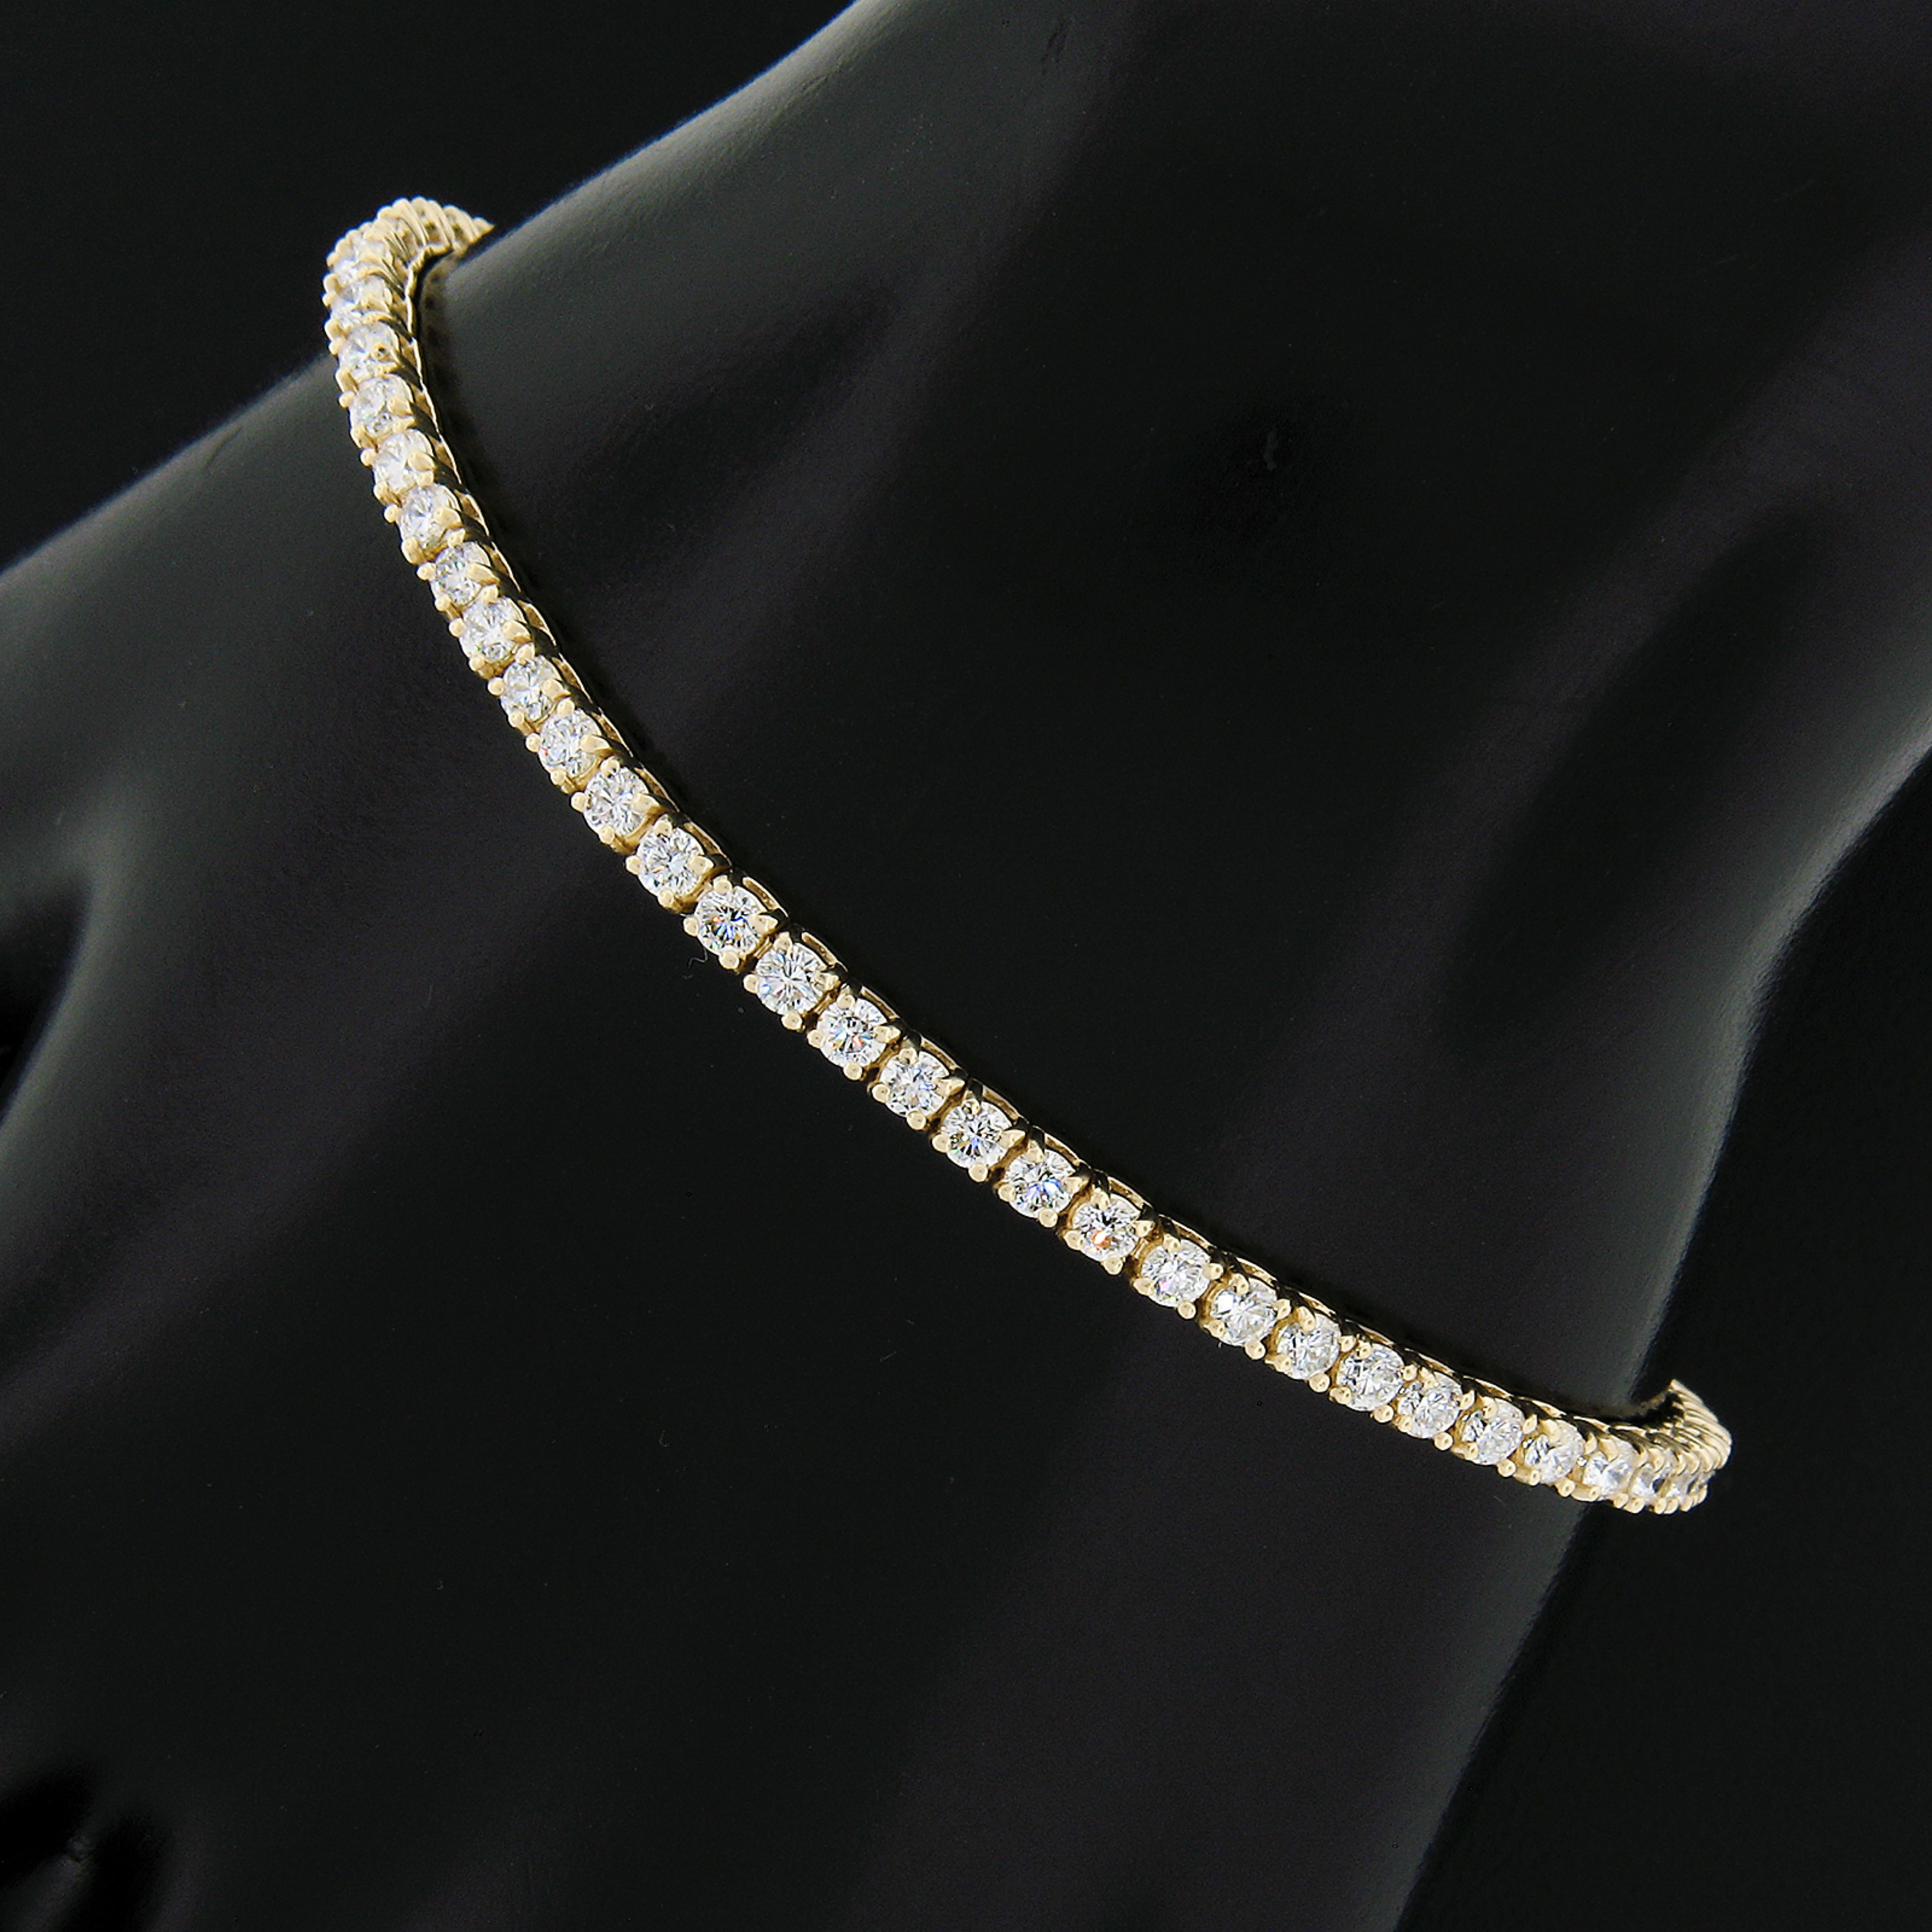 This is a truly breathtaking, classic, diamond line tennis bracelet crafted in solid 14k yellow gold and neatly set with 68 round brilliant cut diamonds throughout. Each diamond sits in a beautiful and sturdy 4-prong basket. These TOP QUALITY